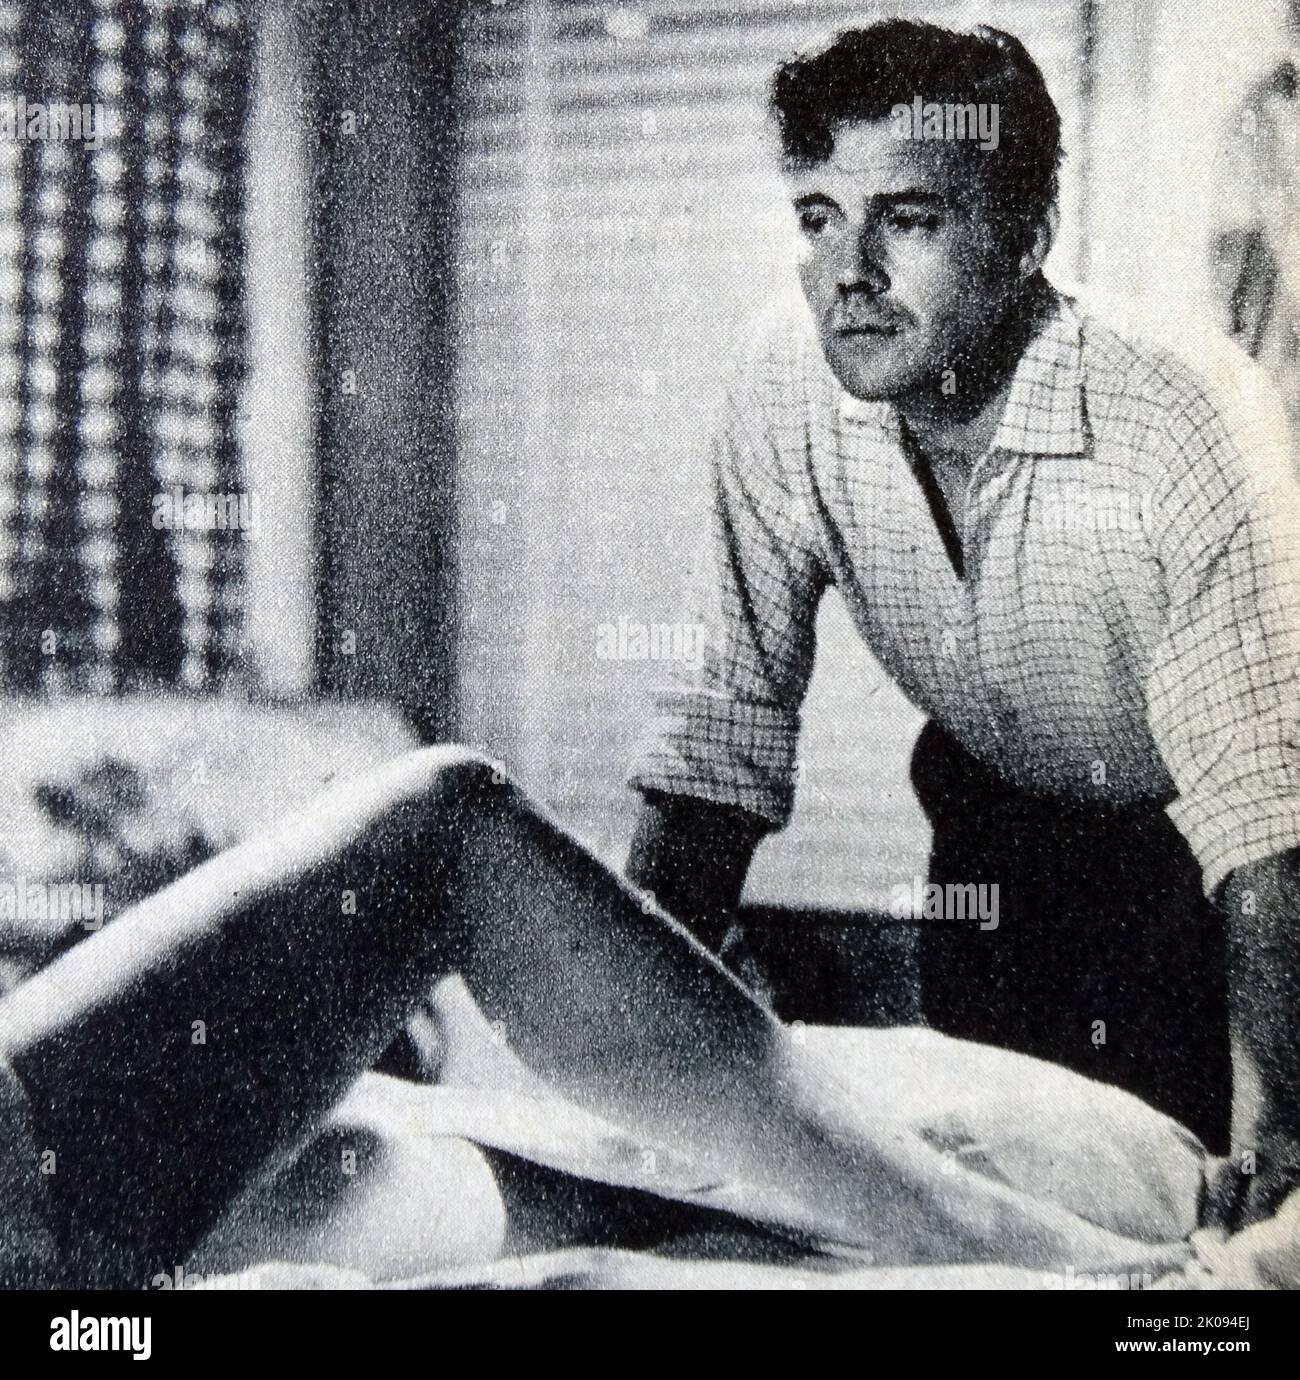 Newspaper review of the The Mind Benders, a 1963 British thriller film, photograph of Dirk Bogarde. Stock Photo